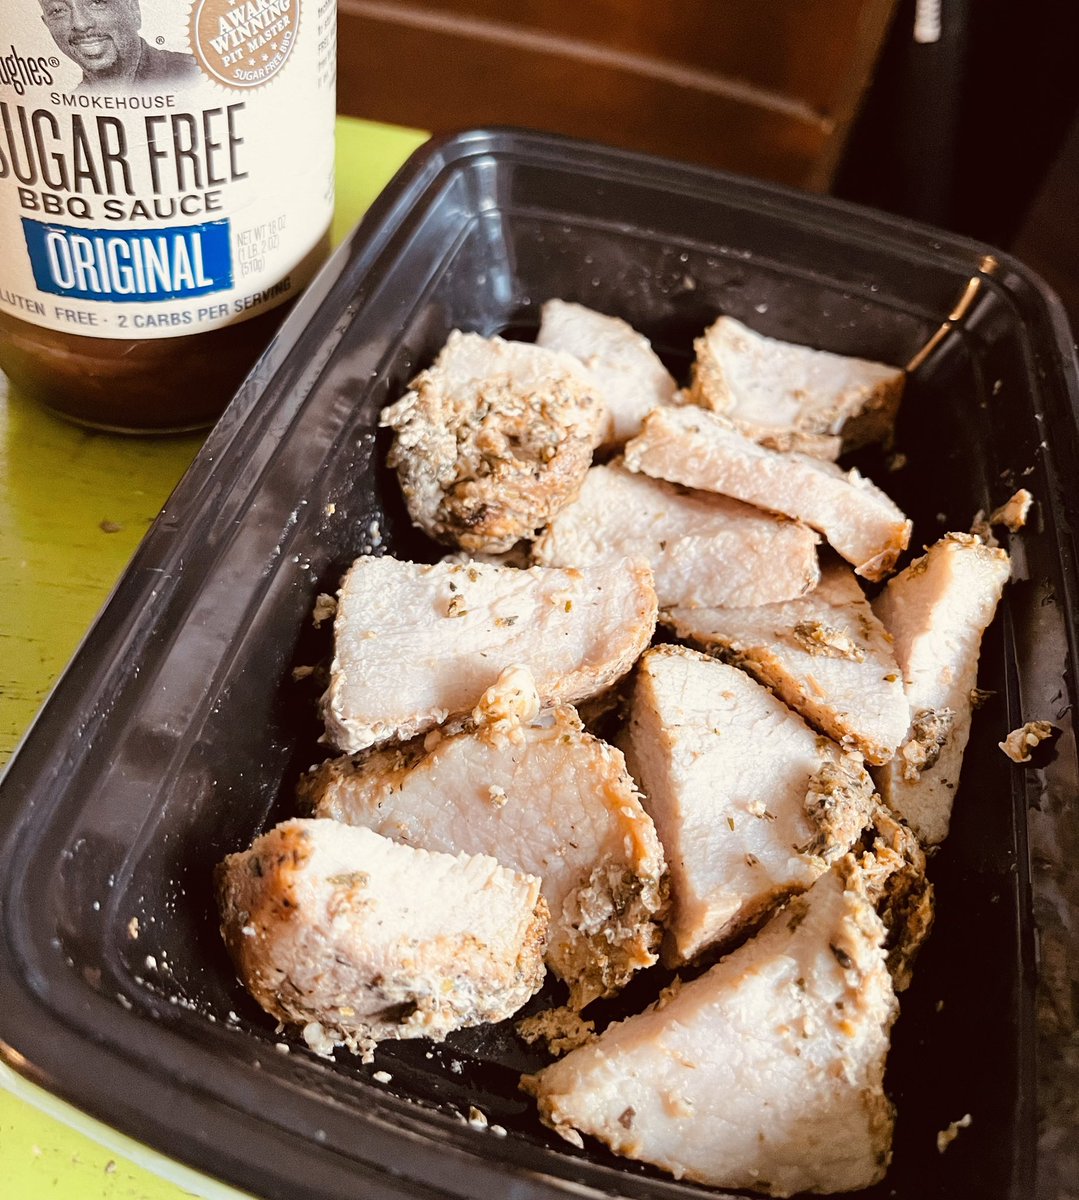 Day 8️⃣6️⃣ (5.26.24): a 12oz pork loin snack with some @ghughessugarfree #BBQ sauce on the side. #carnivorewomen  #carnivoretribe #carnivoreclub #carnivoreweightloss #carnivore #carnivorecommunity  #weightlossjourney #liondiet
#weightloss #macros #gym #gymlife #meat #meatlover